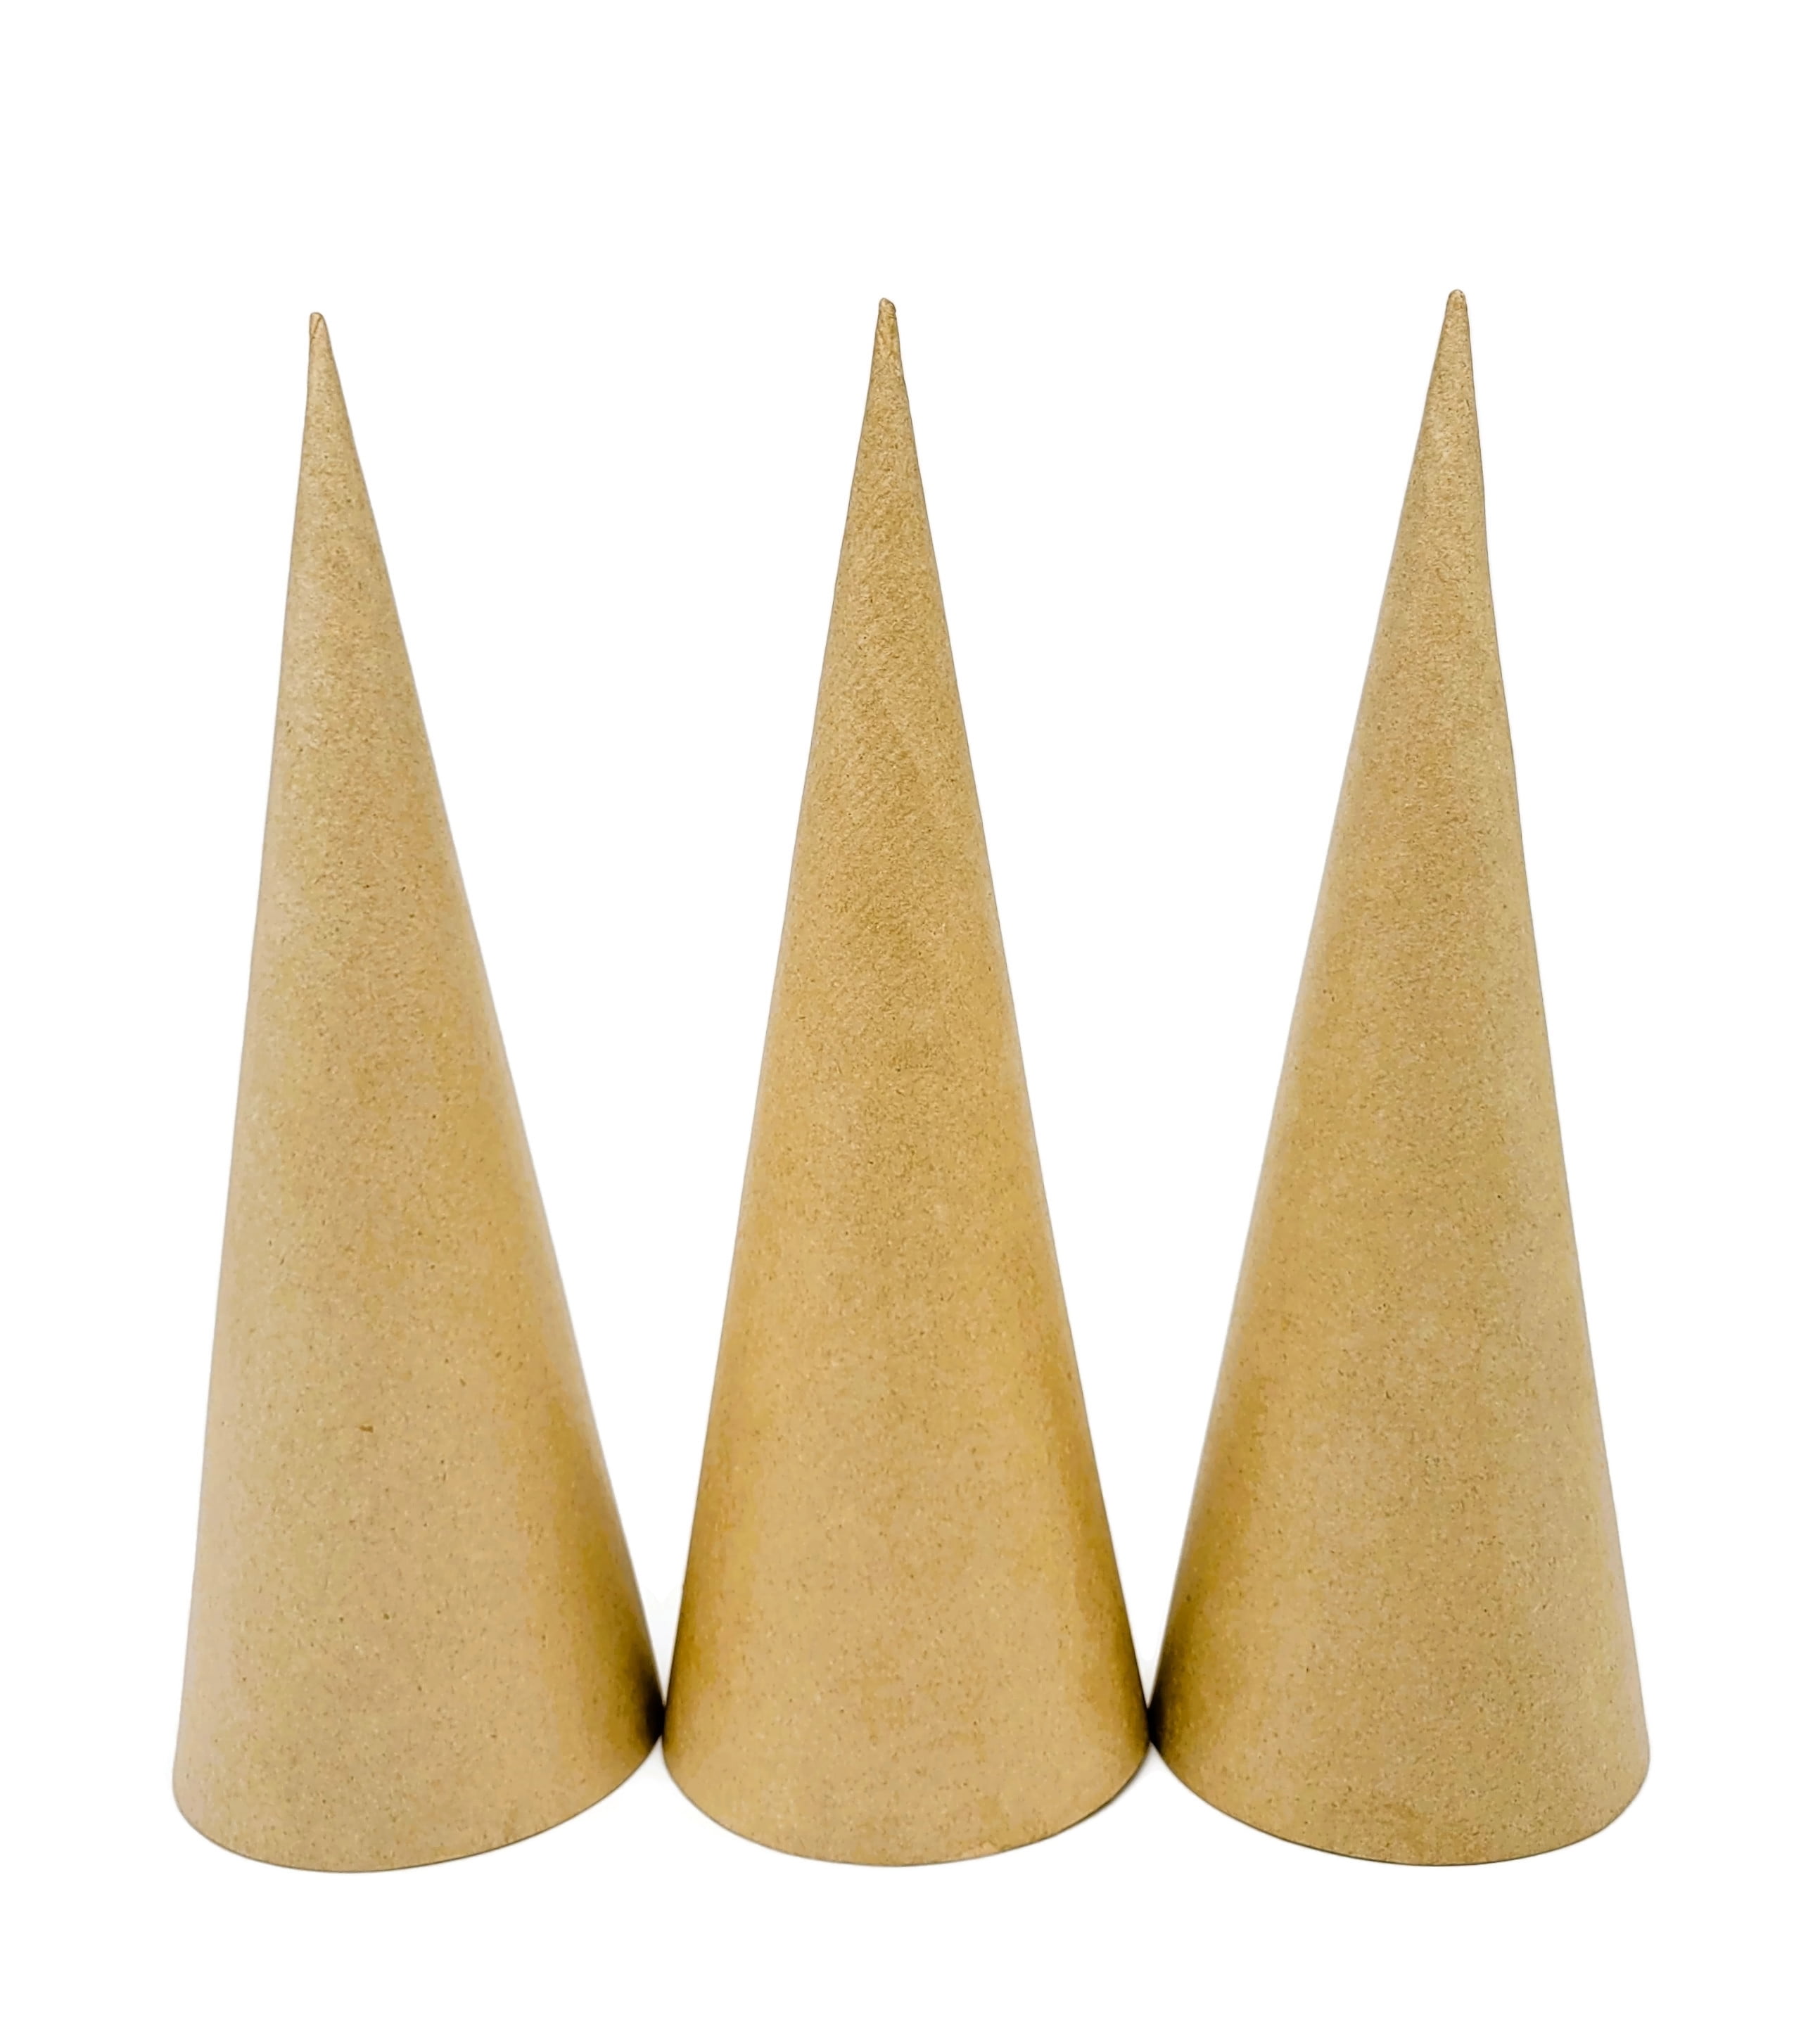  Large Foam Cones for Crafts - Set of 6-12 inches Tall - DIY  Craft Supplies : Arts, Crafts & Sewing